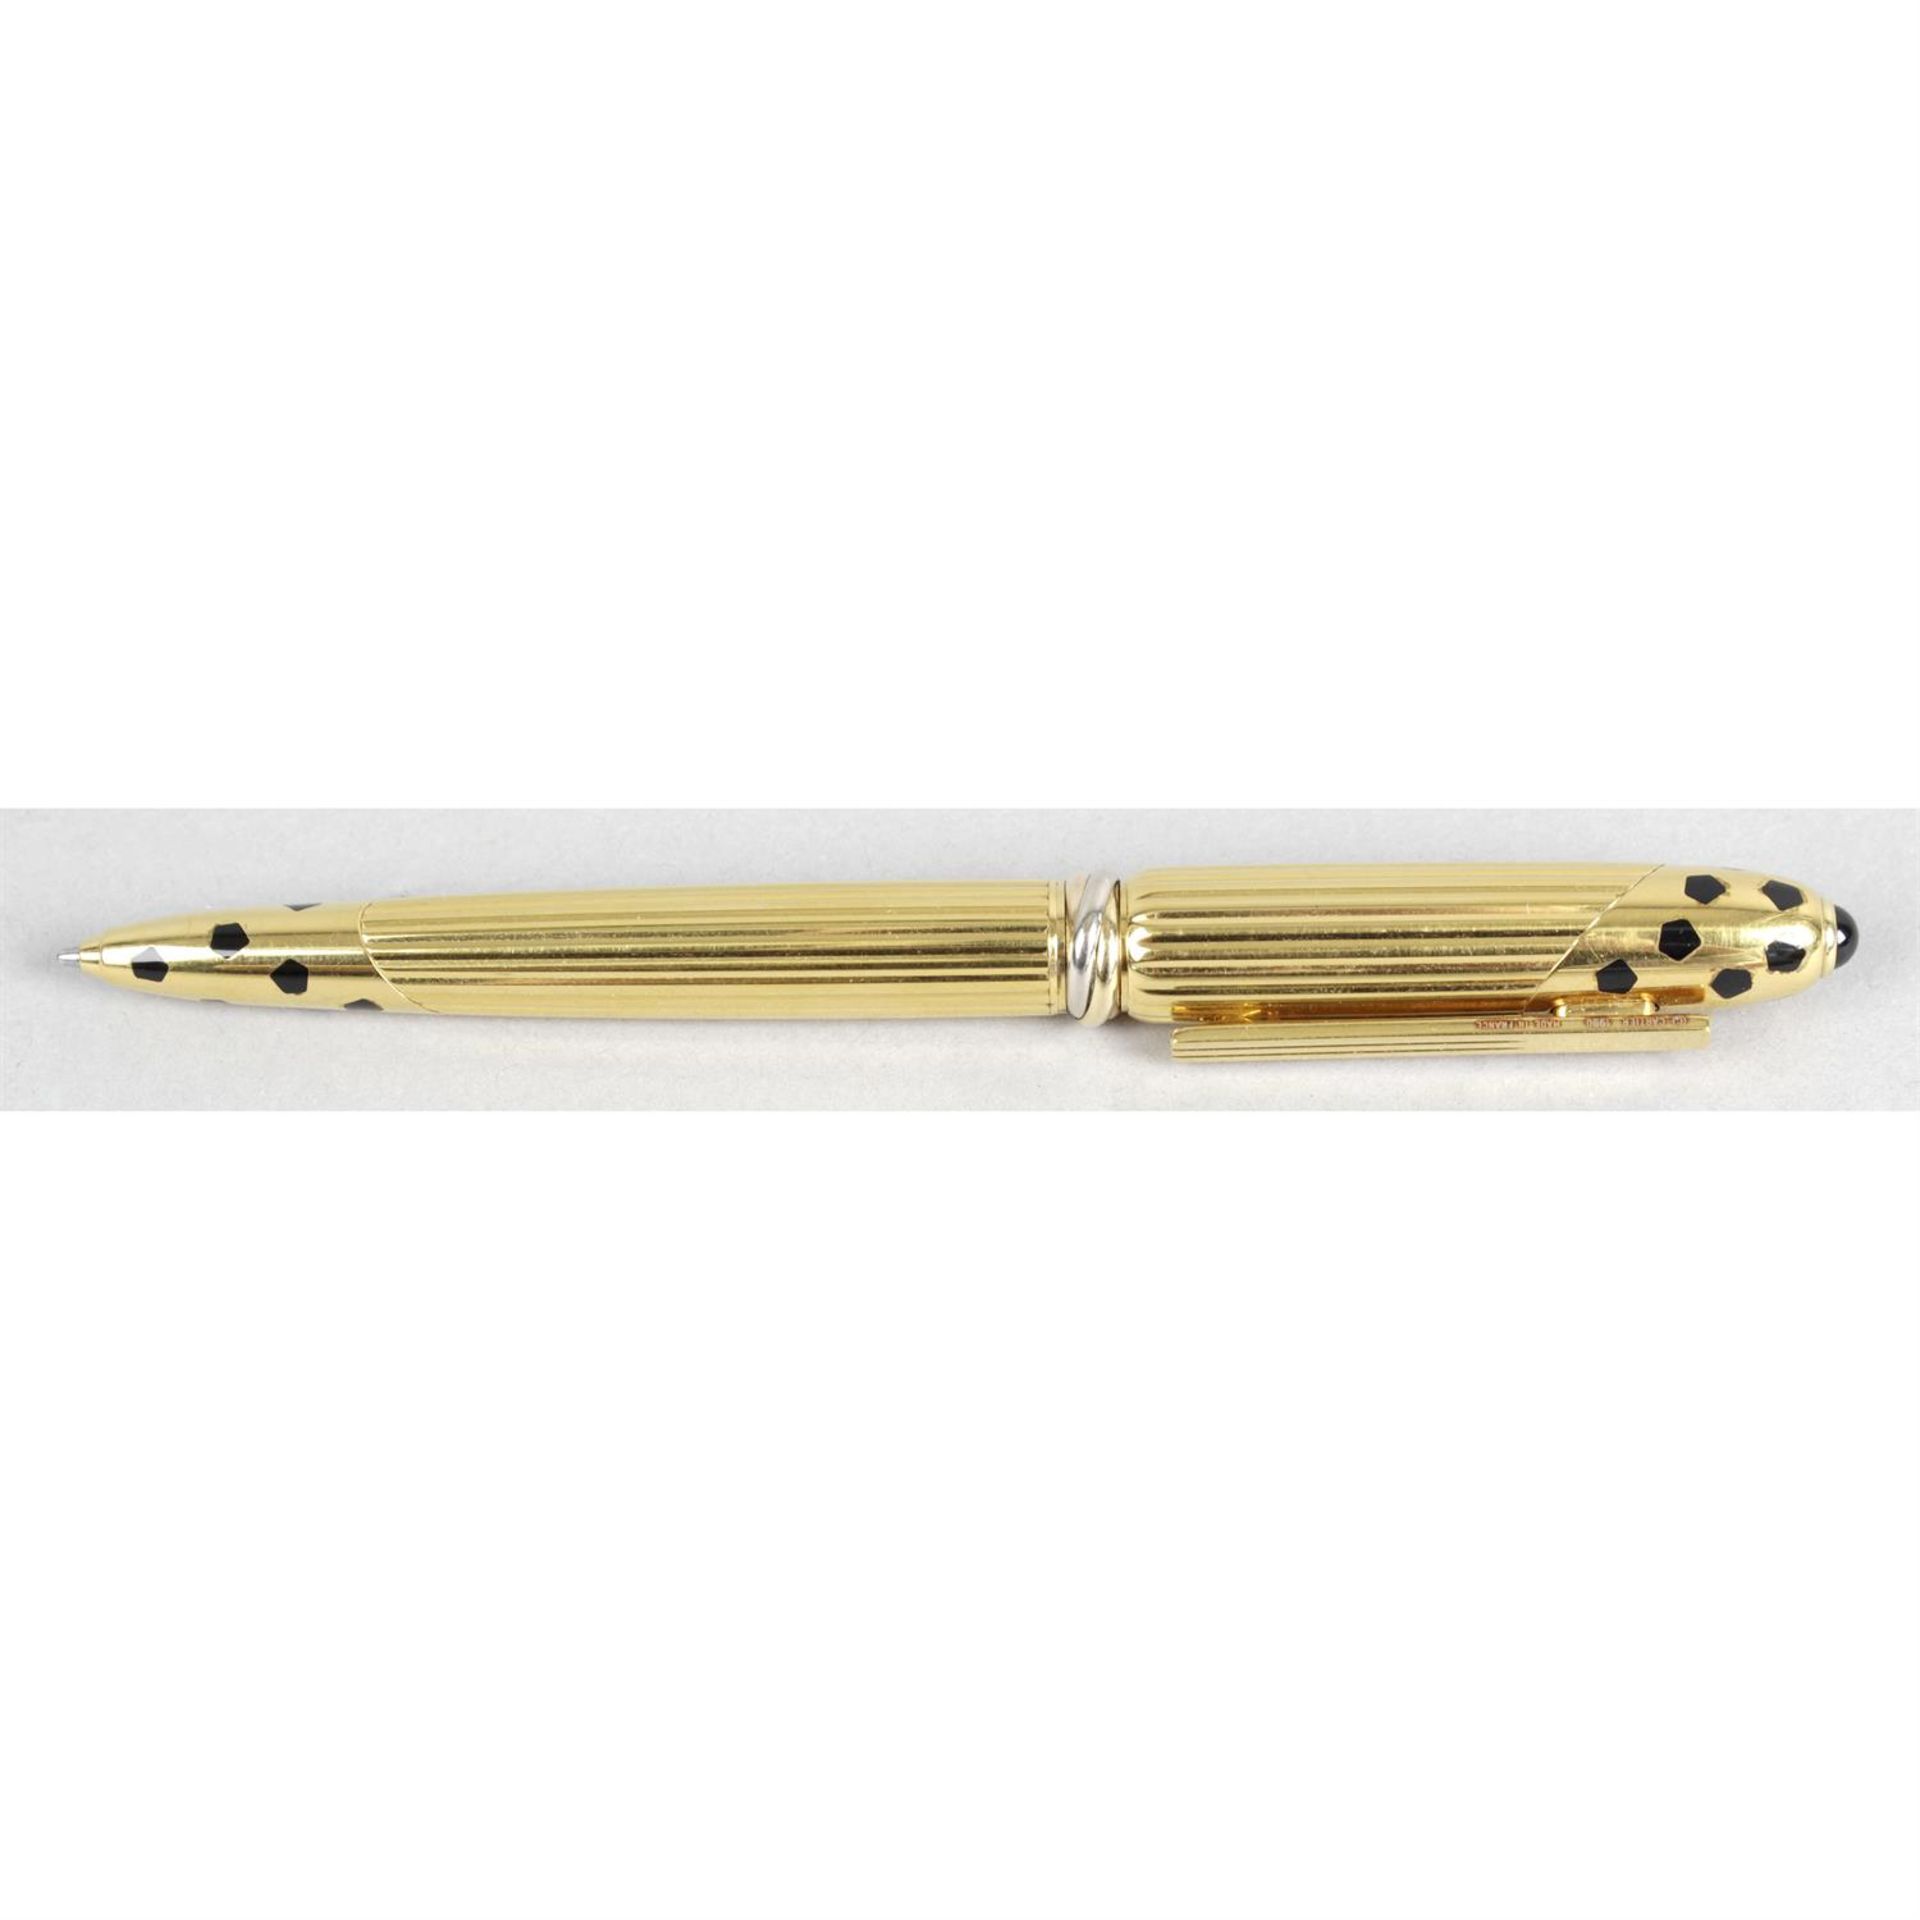 A gold plated Panthere de Cartier cased ballpoint propelling pen.